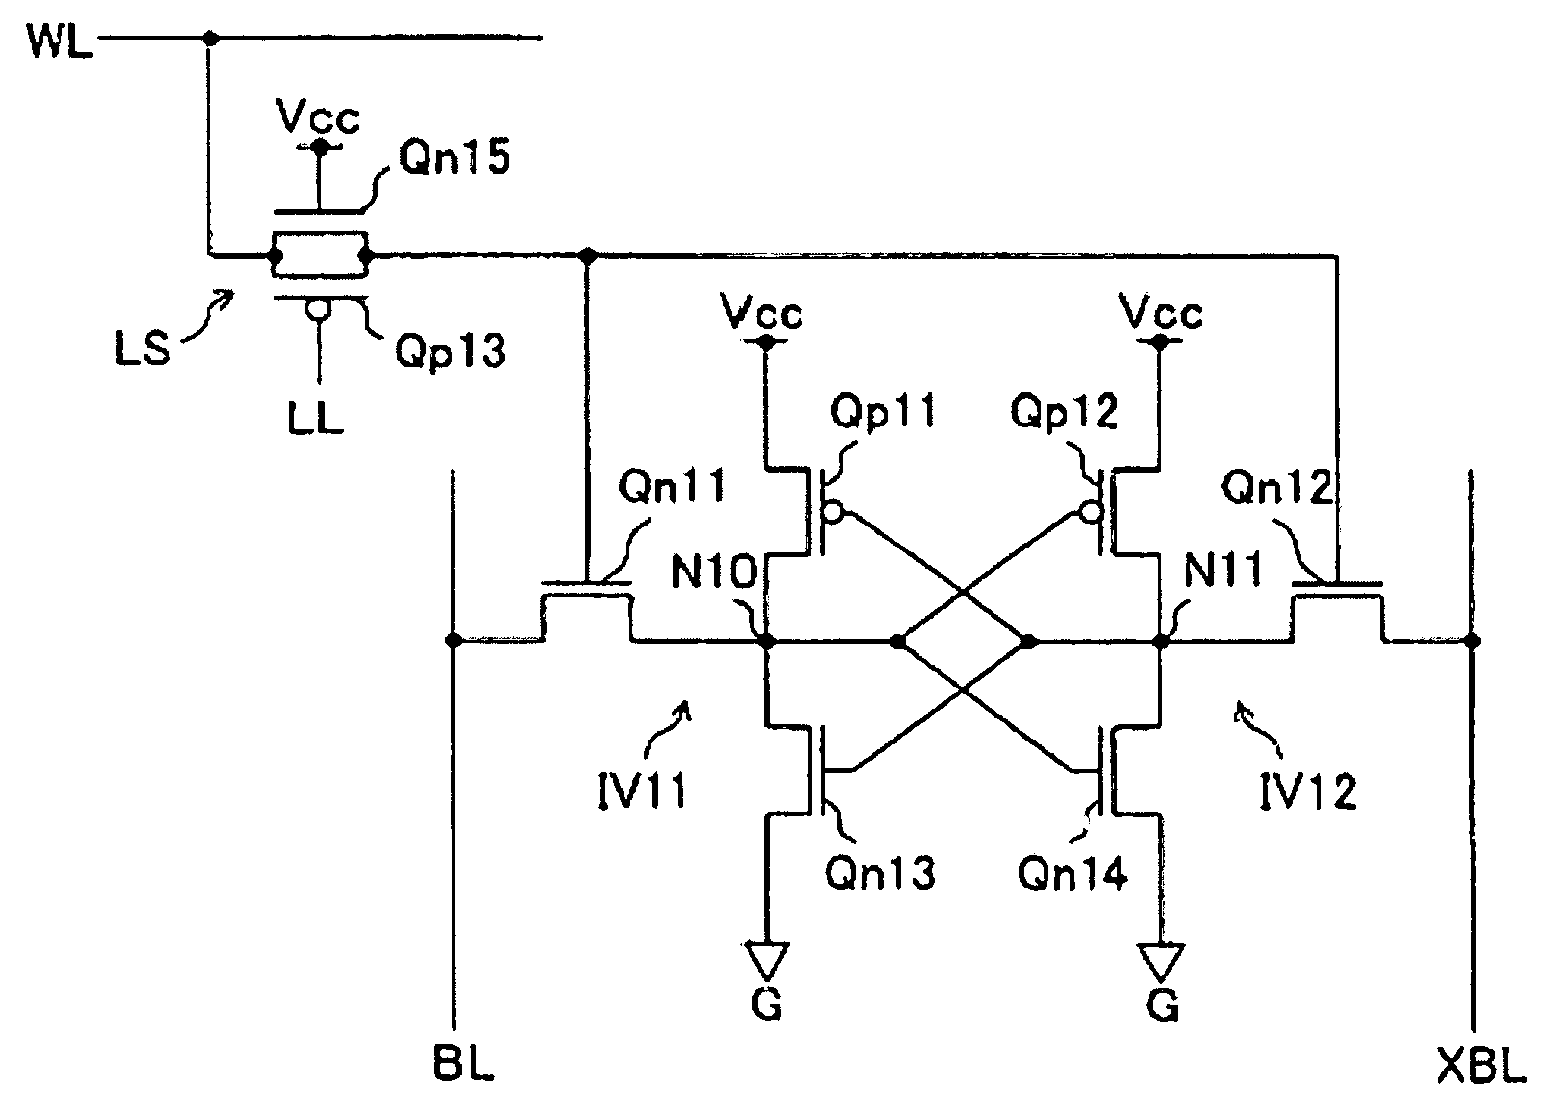 Static memory cell and SRAM device